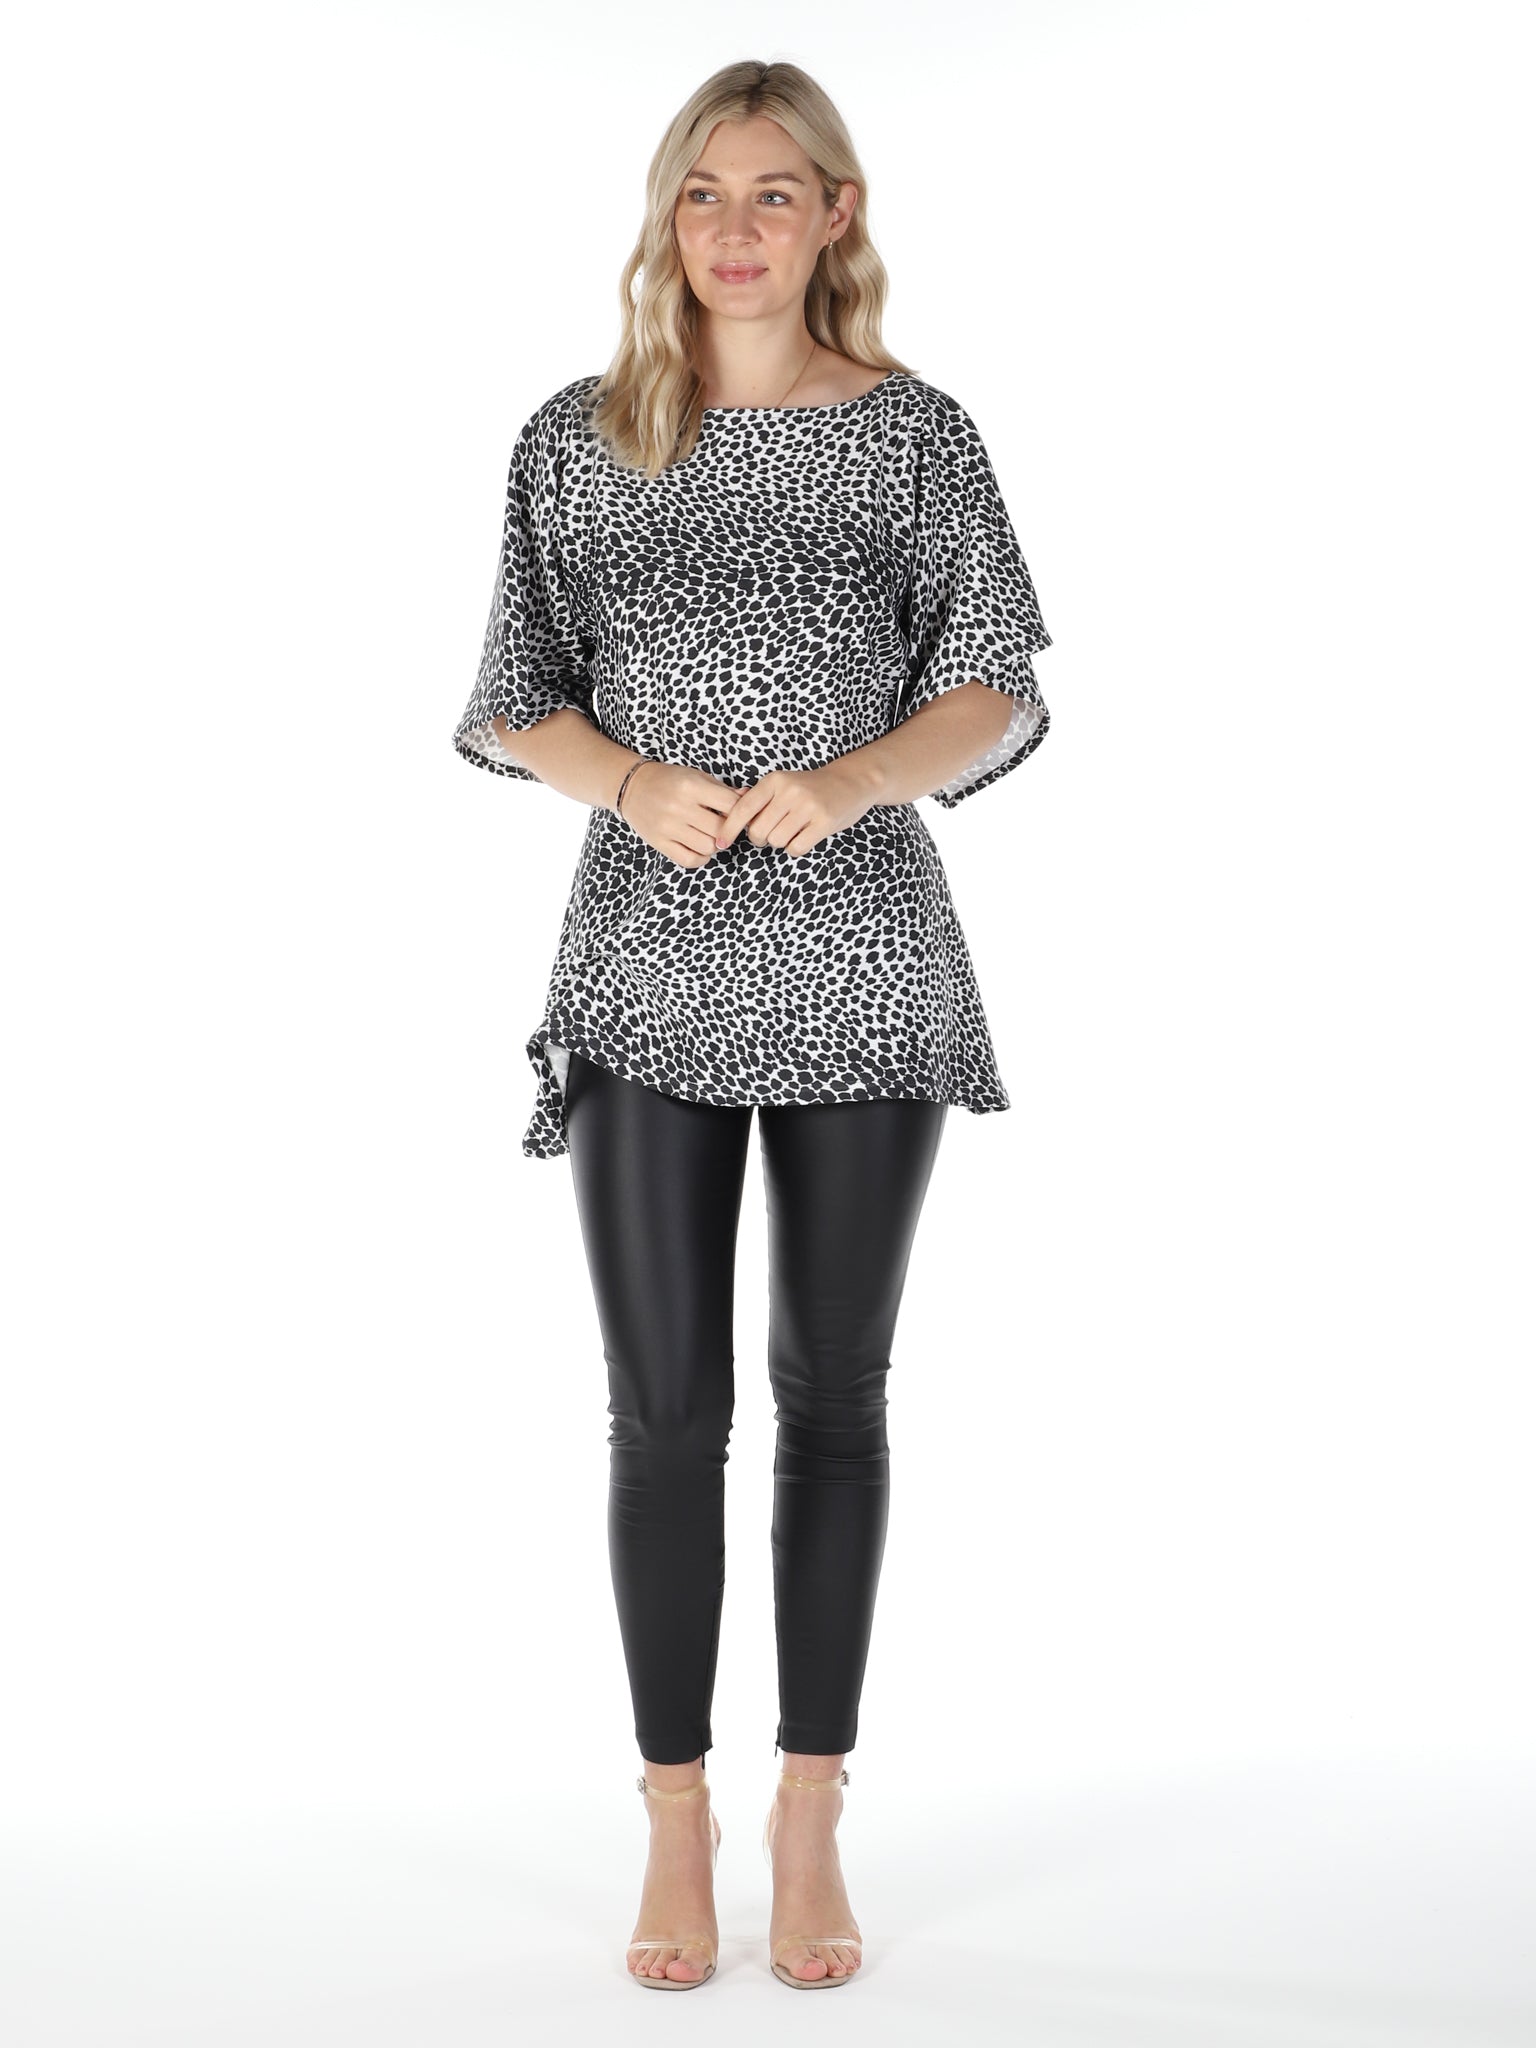 Black and White Leopard Print Atlas Top